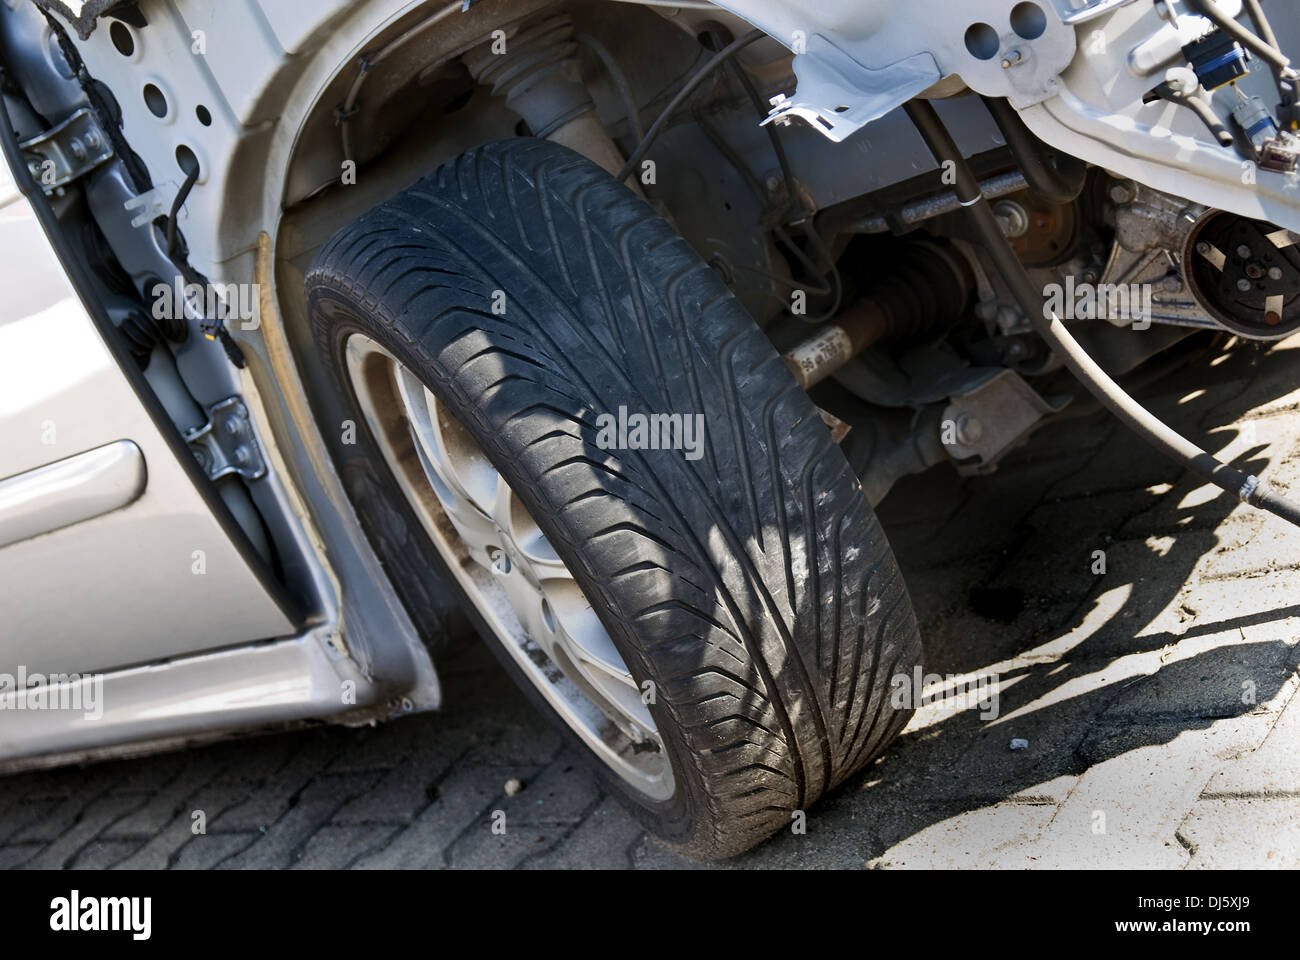 Car involved in accident Stock Photo